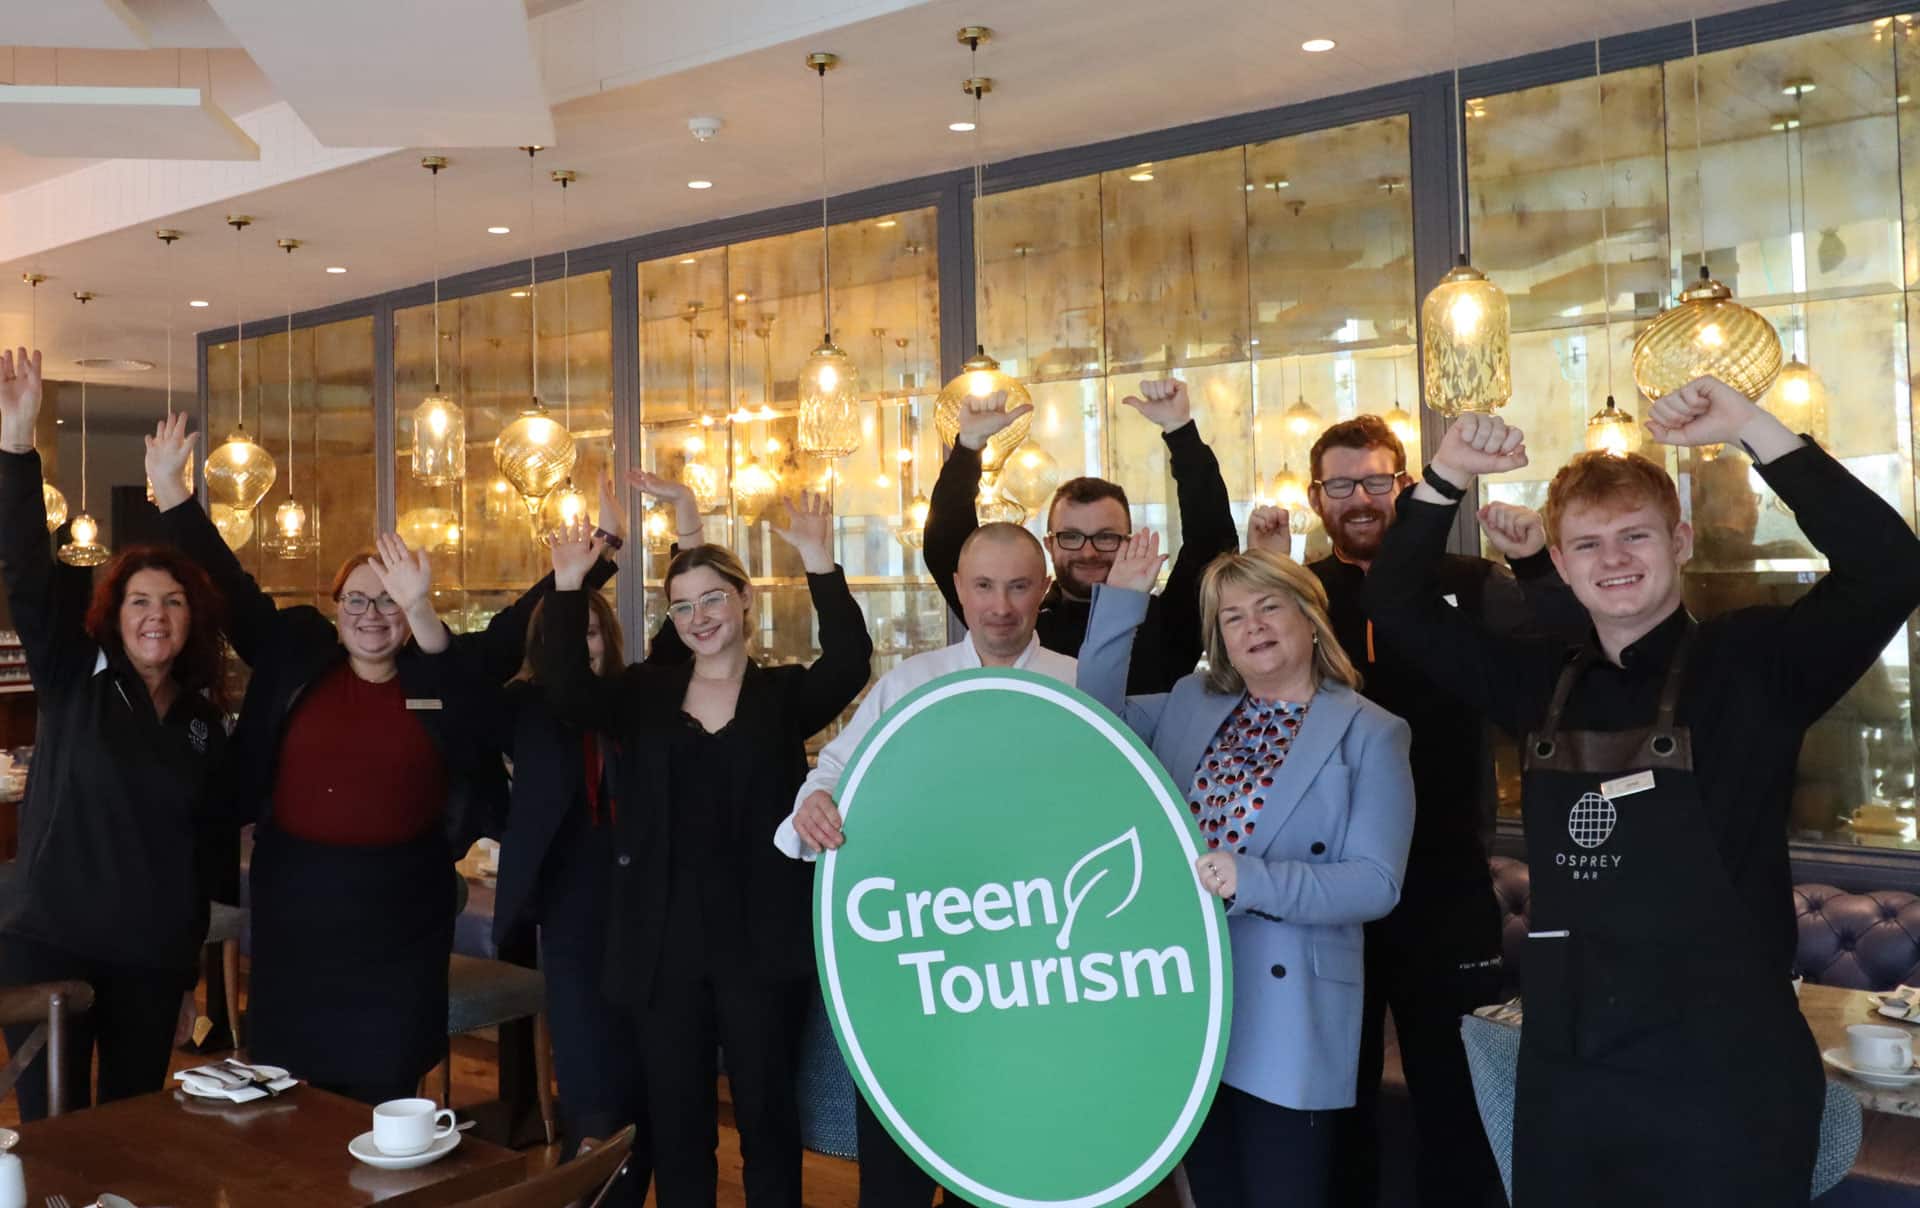 Osprey Hotel, officially accredited by Green Tourism